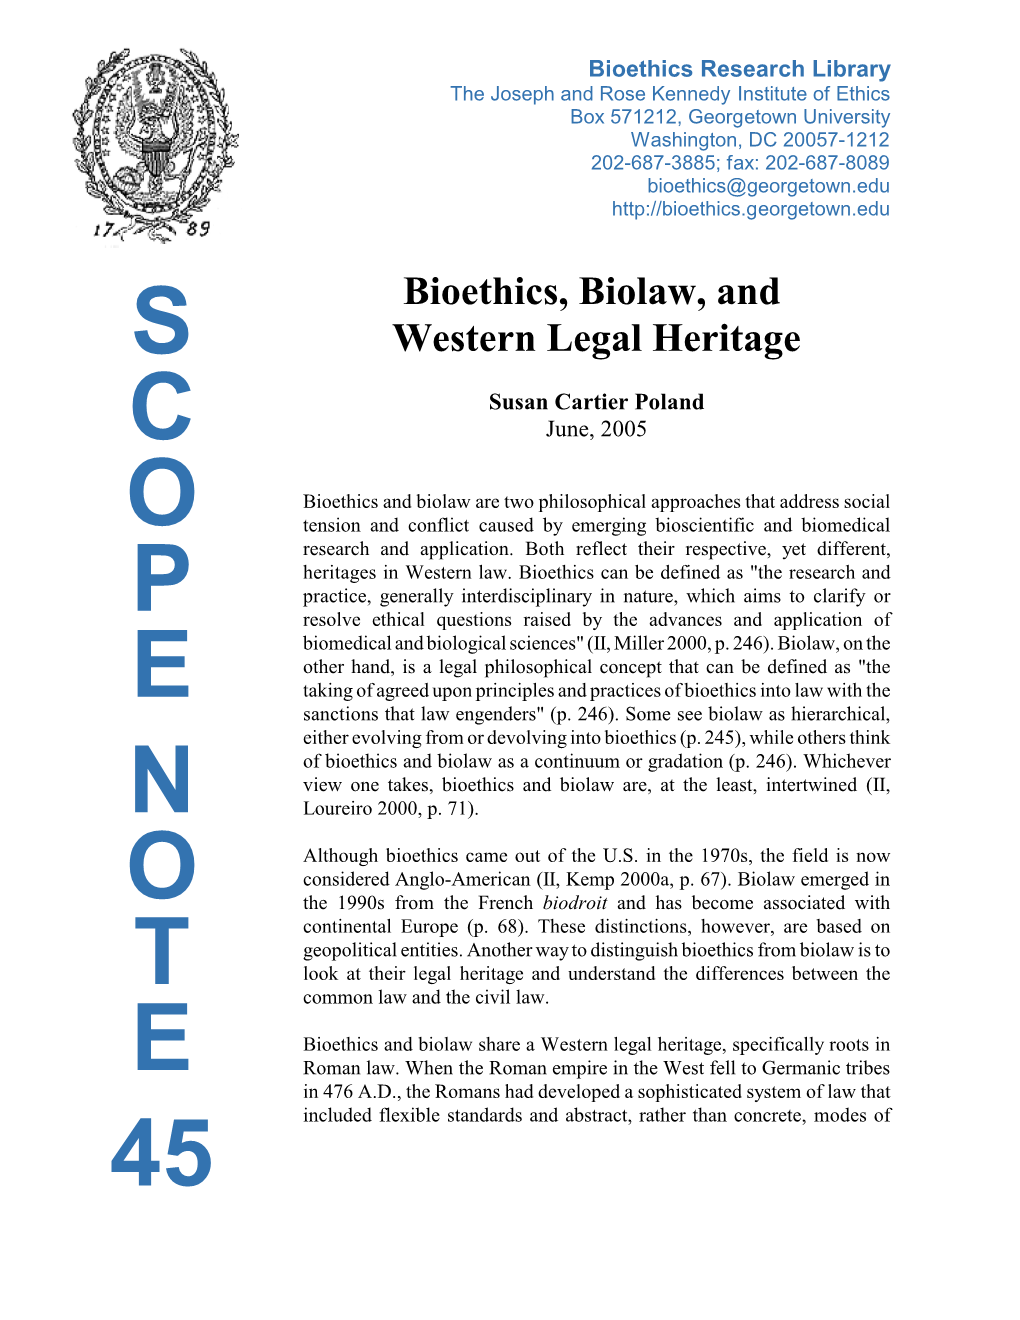 Bioethics, Biolaw, and Western Legal Heritage